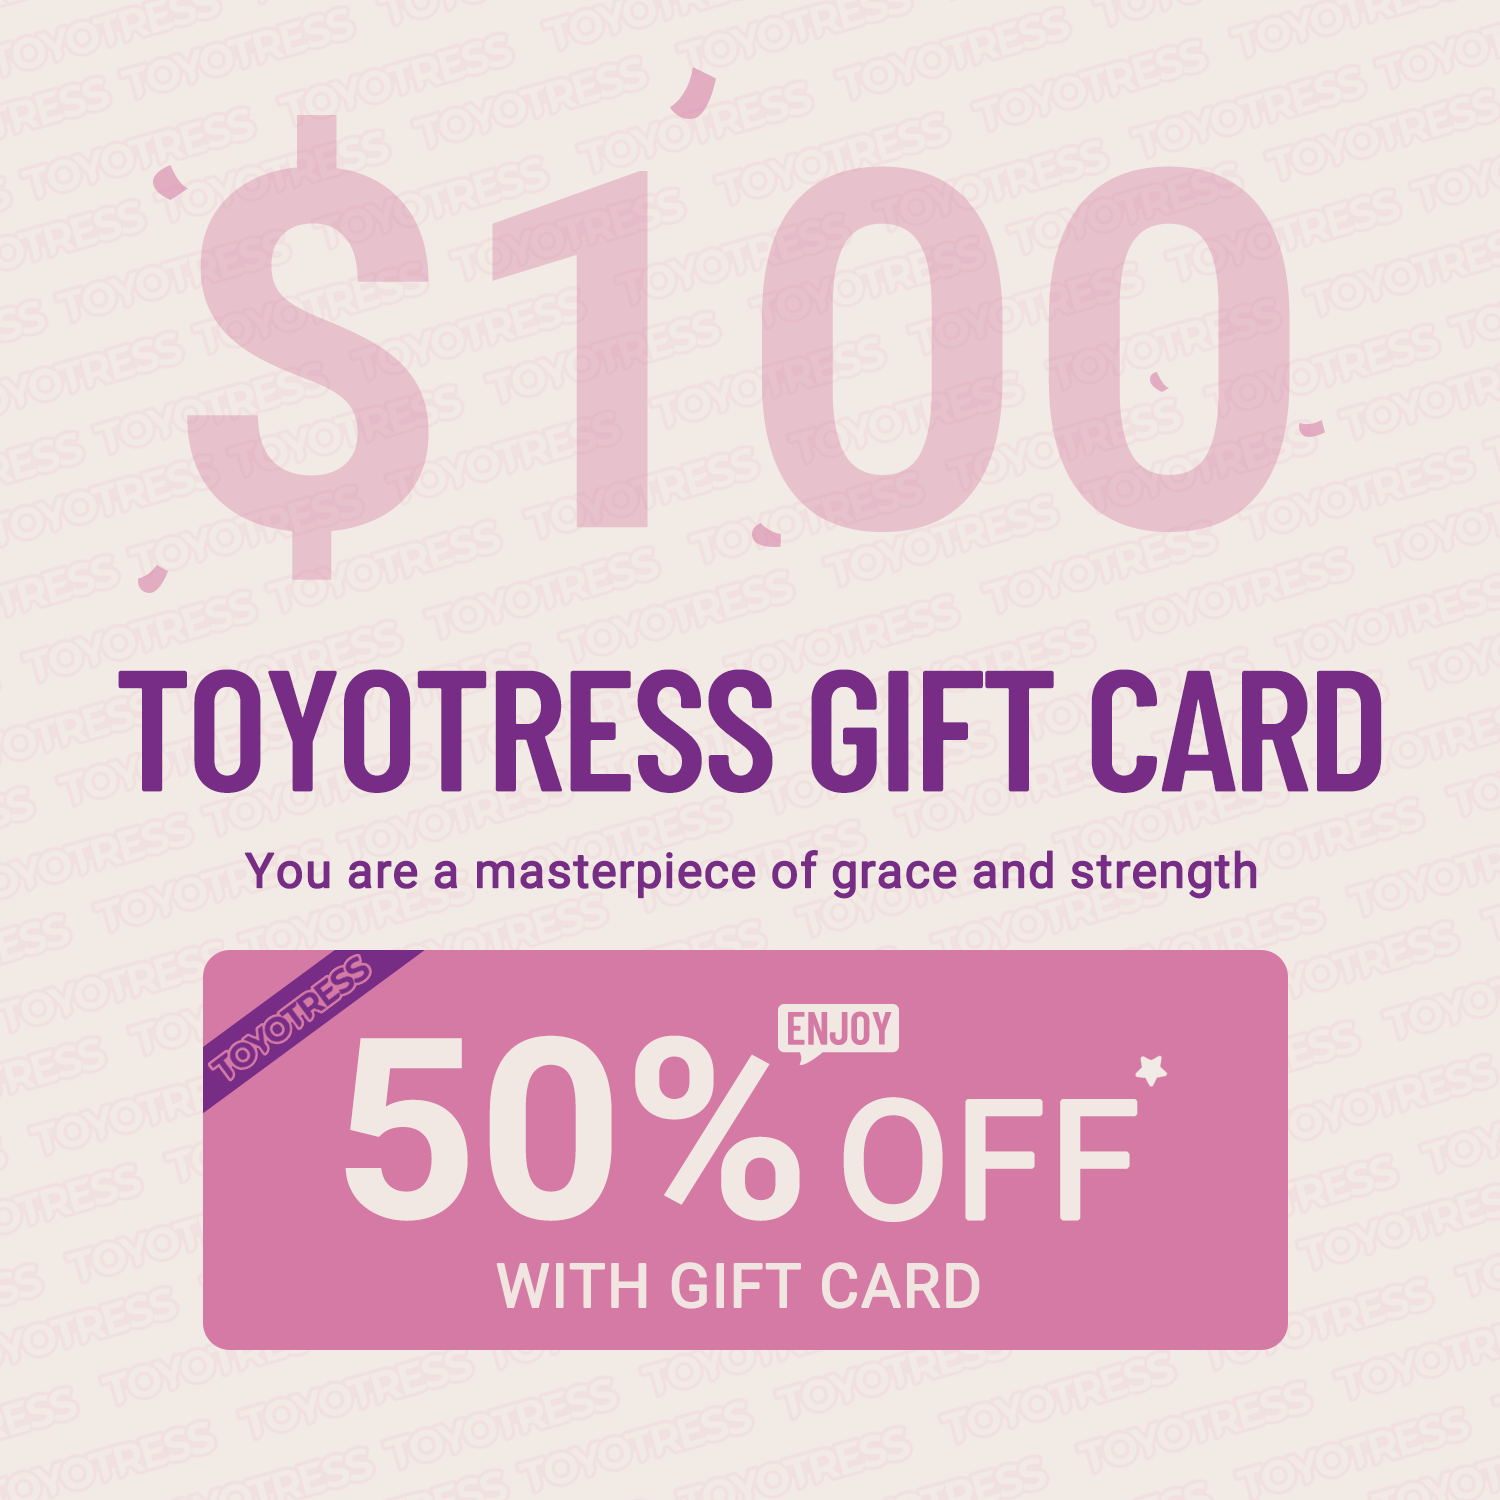 Toyotress gift card-50% off when shopping with this card